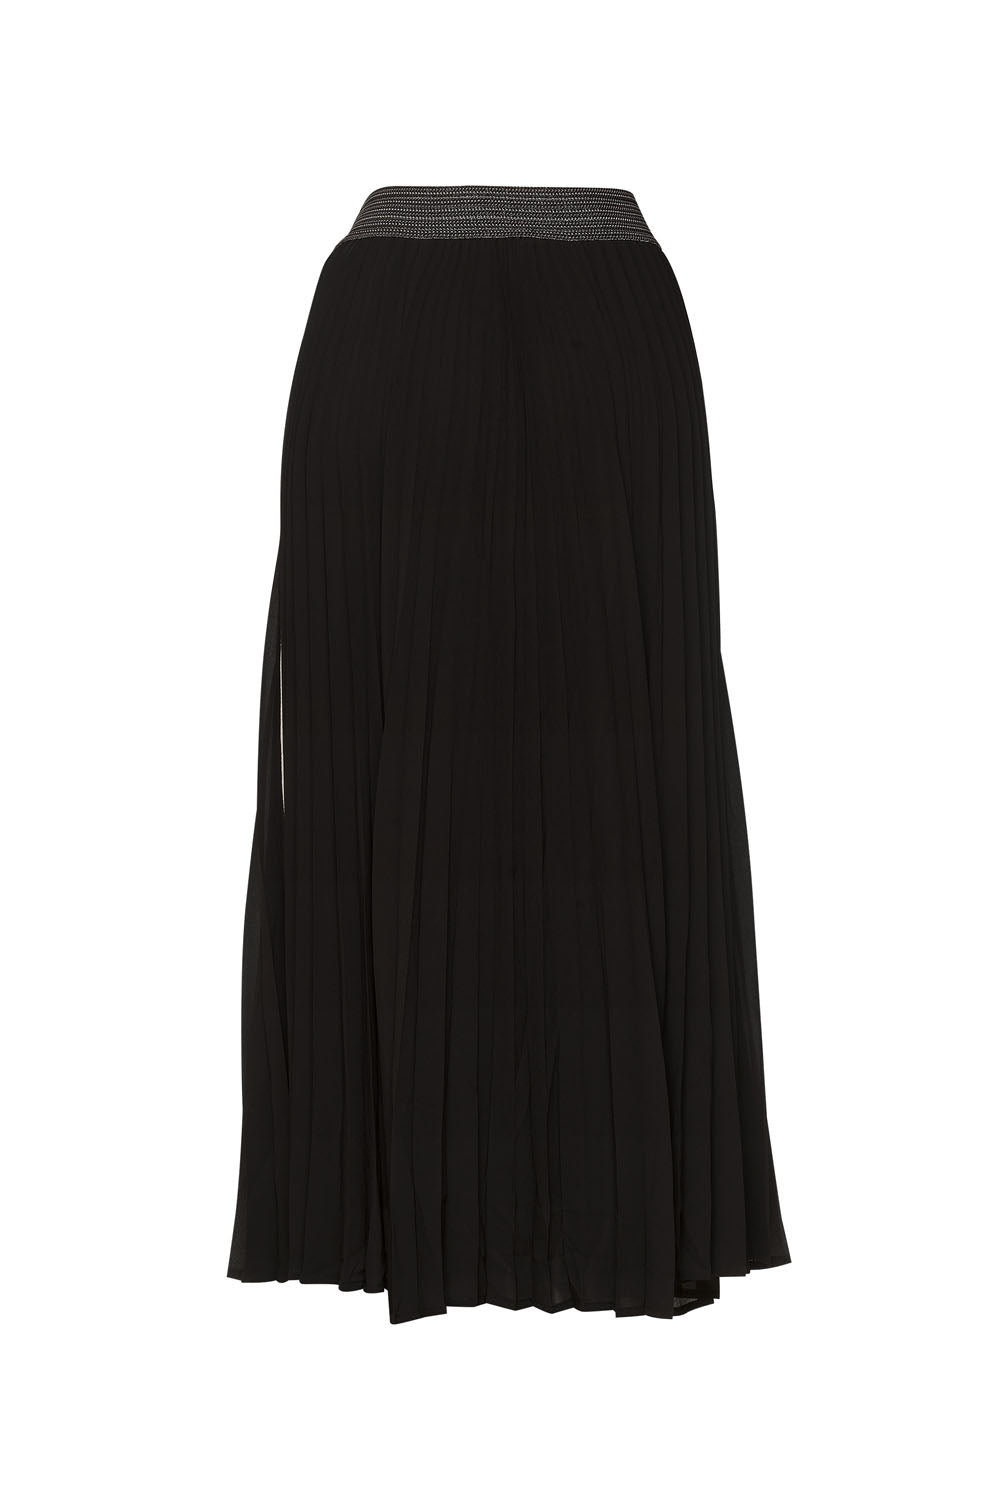 MADLY SWEETLY JUST PLEAT IT SKIRT - BLACK - THE VOGUE STORE